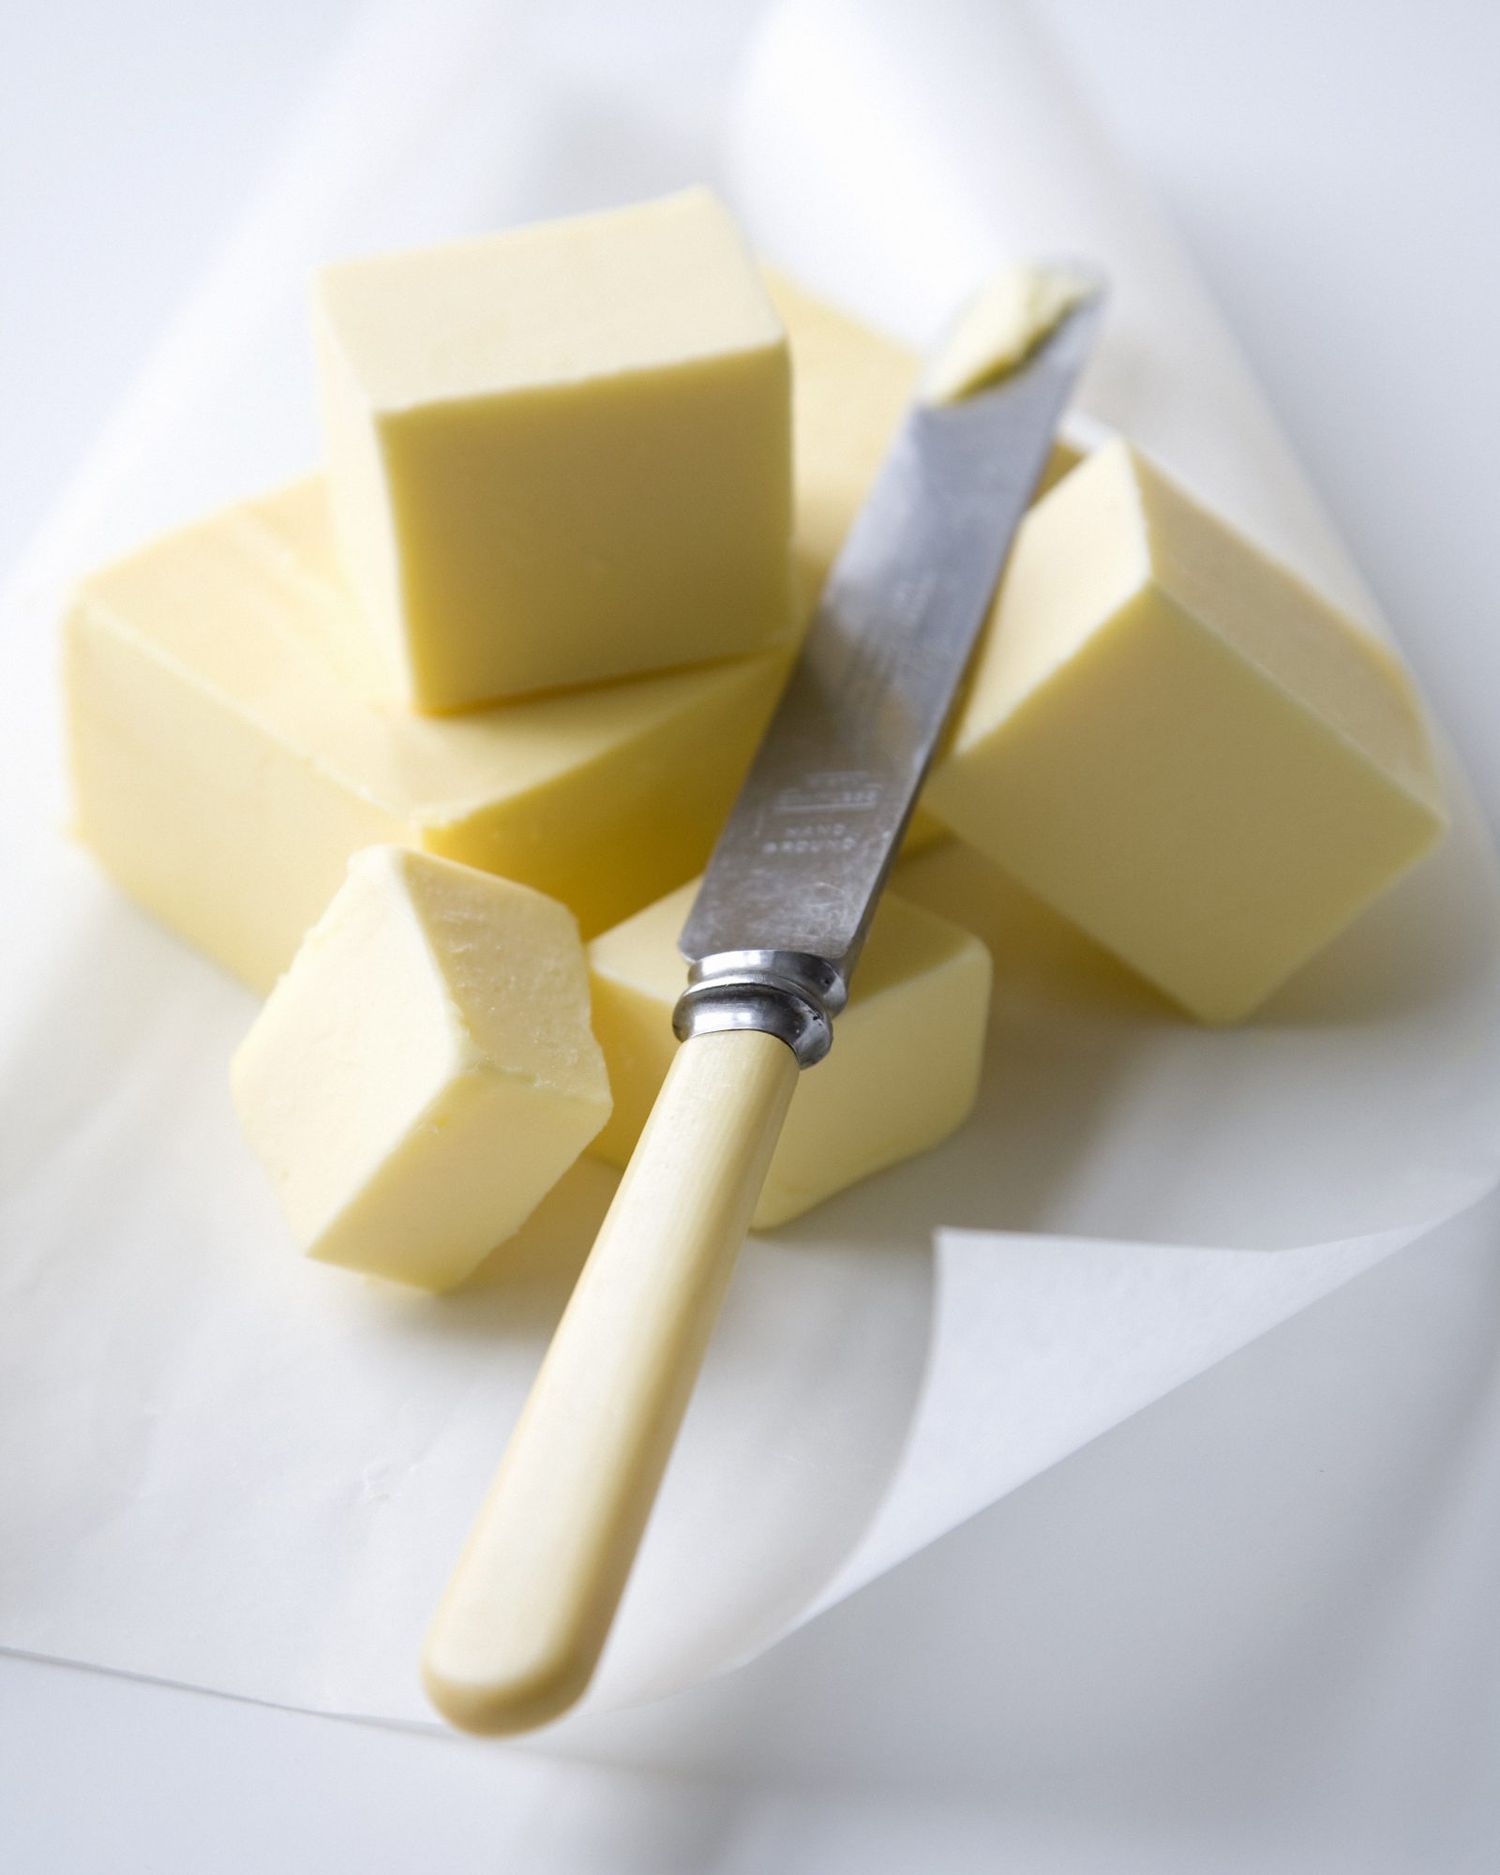 Blocks of butter and butter knife on parchment paper